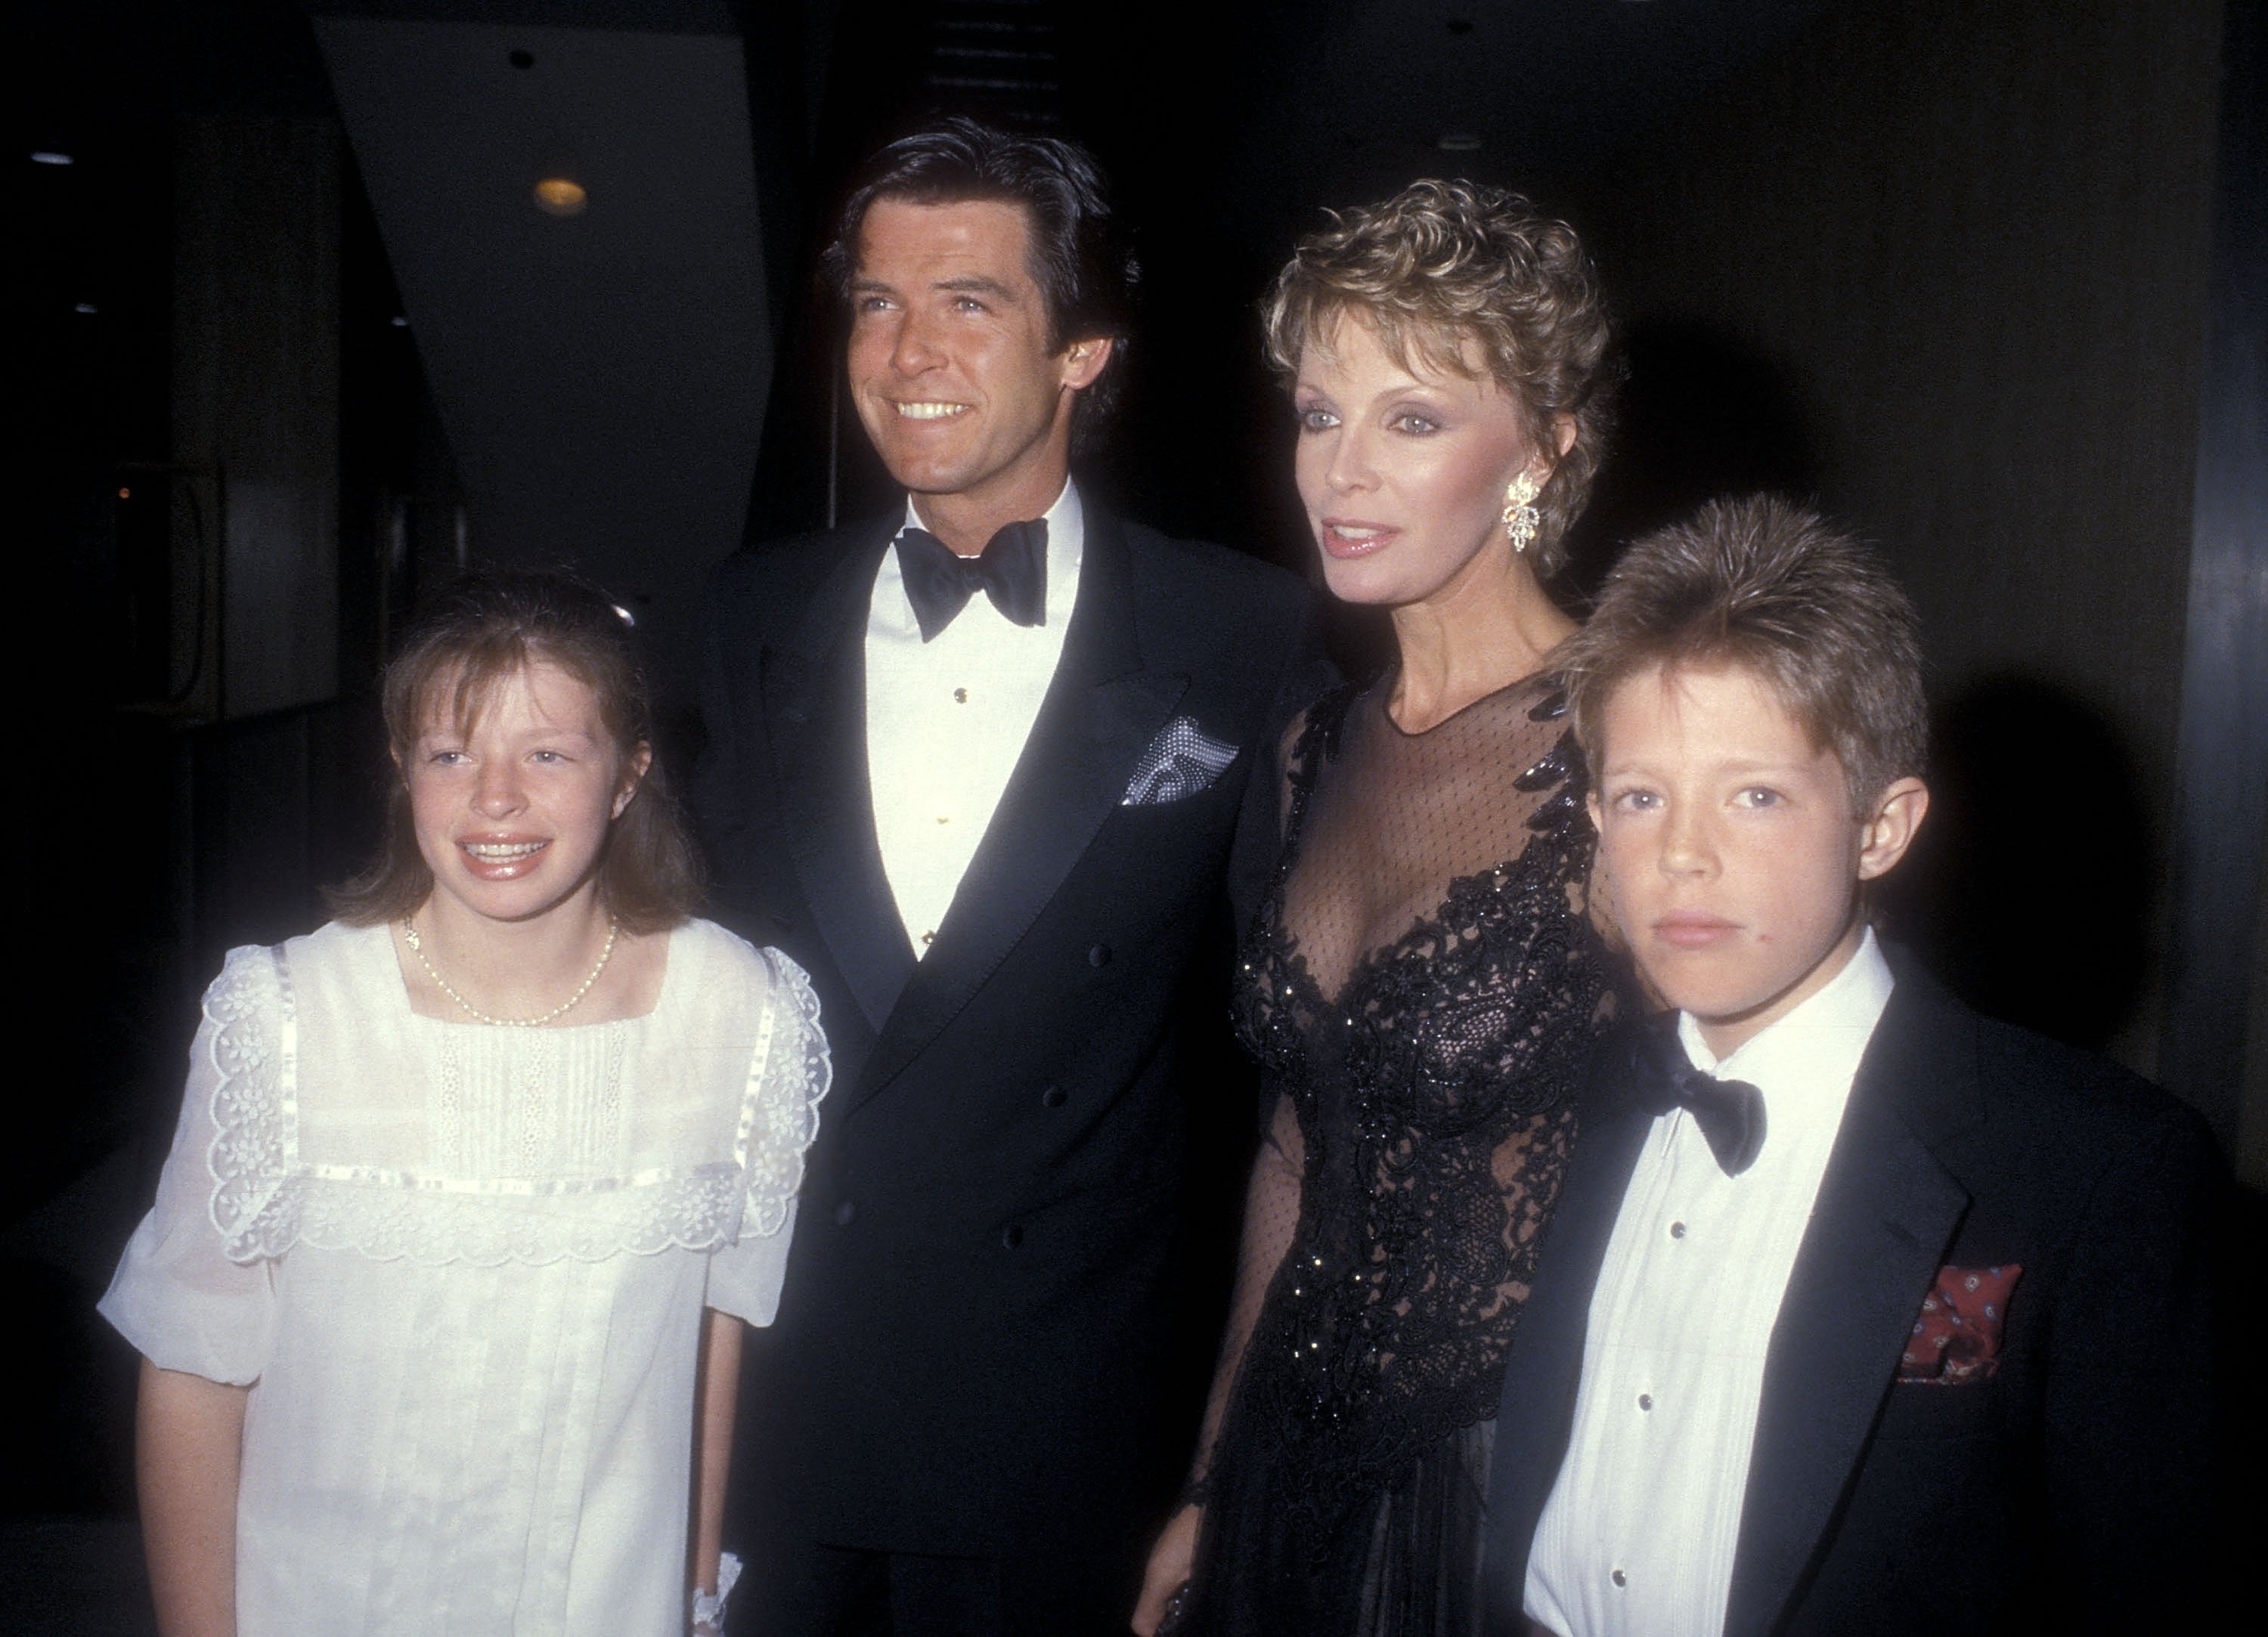 Actor Pierce Brosnan, wife Cassandra Harris, daughter Charlotte Harris and Christopher Harris attend the "Cats" Opening night musical performance on January 11, 1985 at the Shubert Theater in Century City, CA.  |  Source: Getty Images